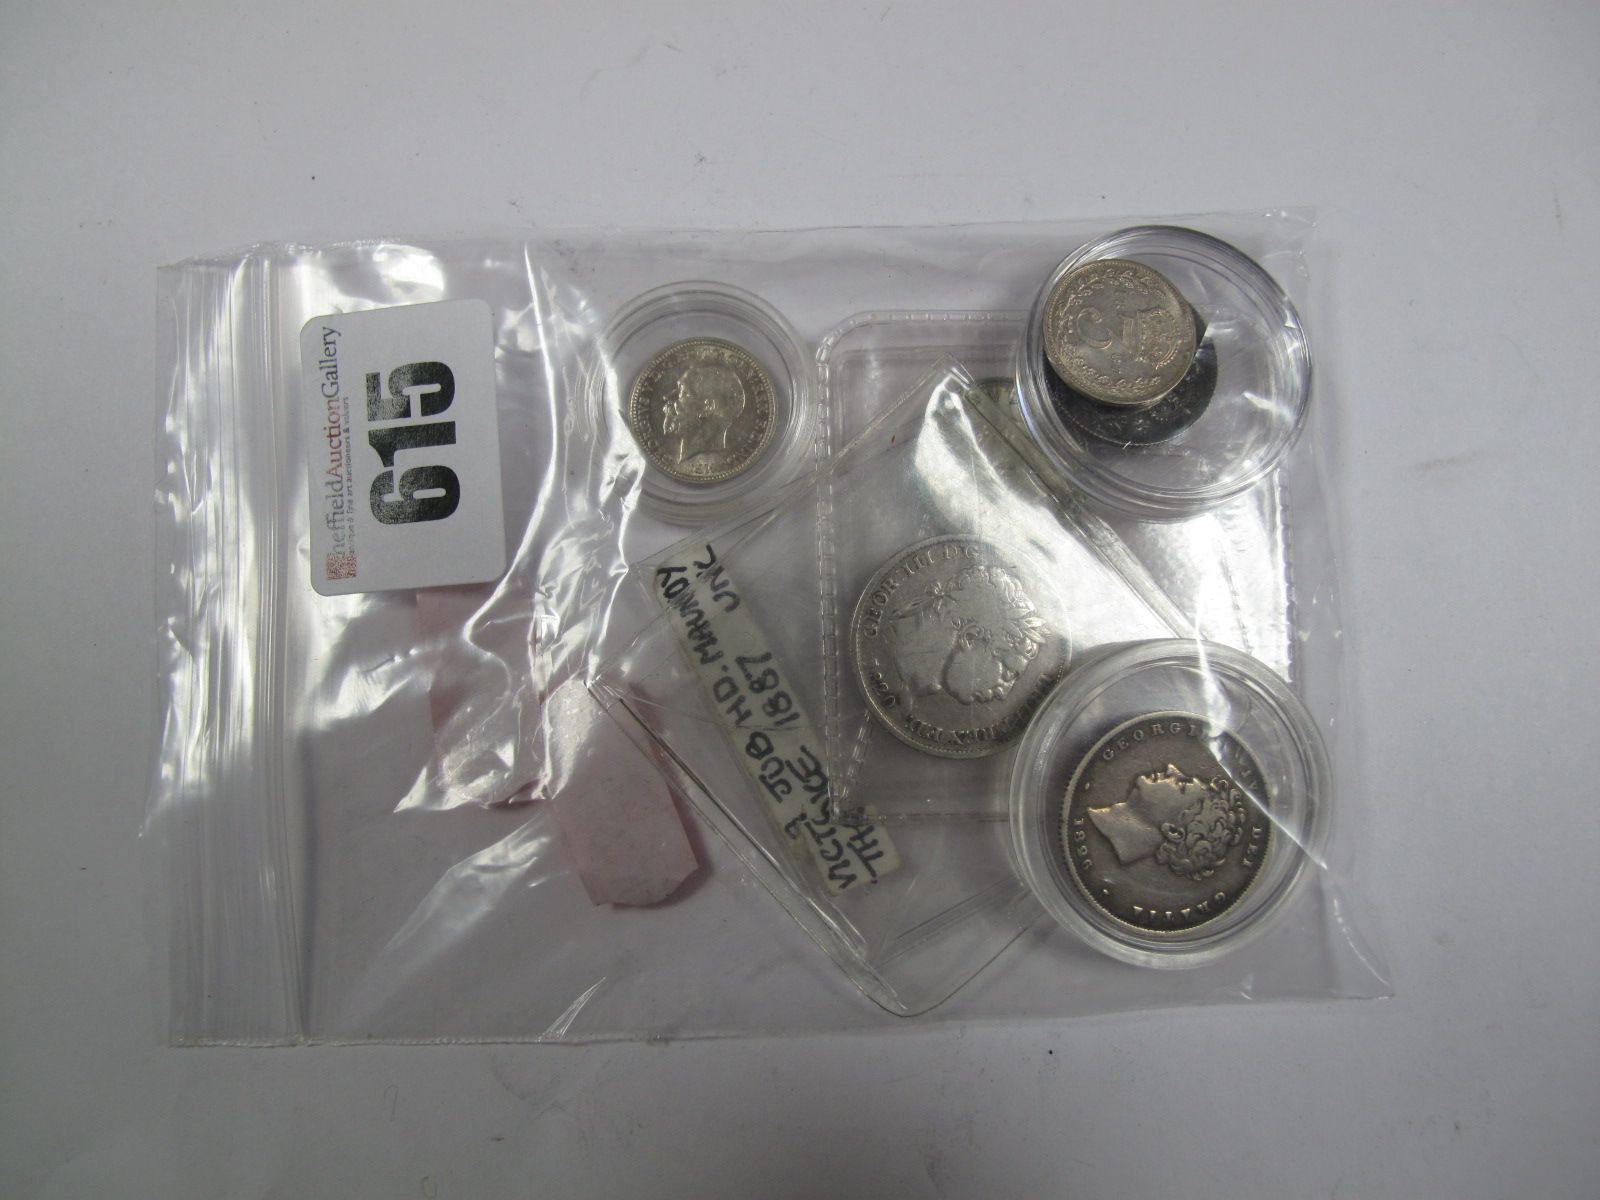 Shillings: 1820 (NF/F) and 1826 (NF/F). Sixpences: 1887 (JH) (GF), 1897 (GF but tarnished) and